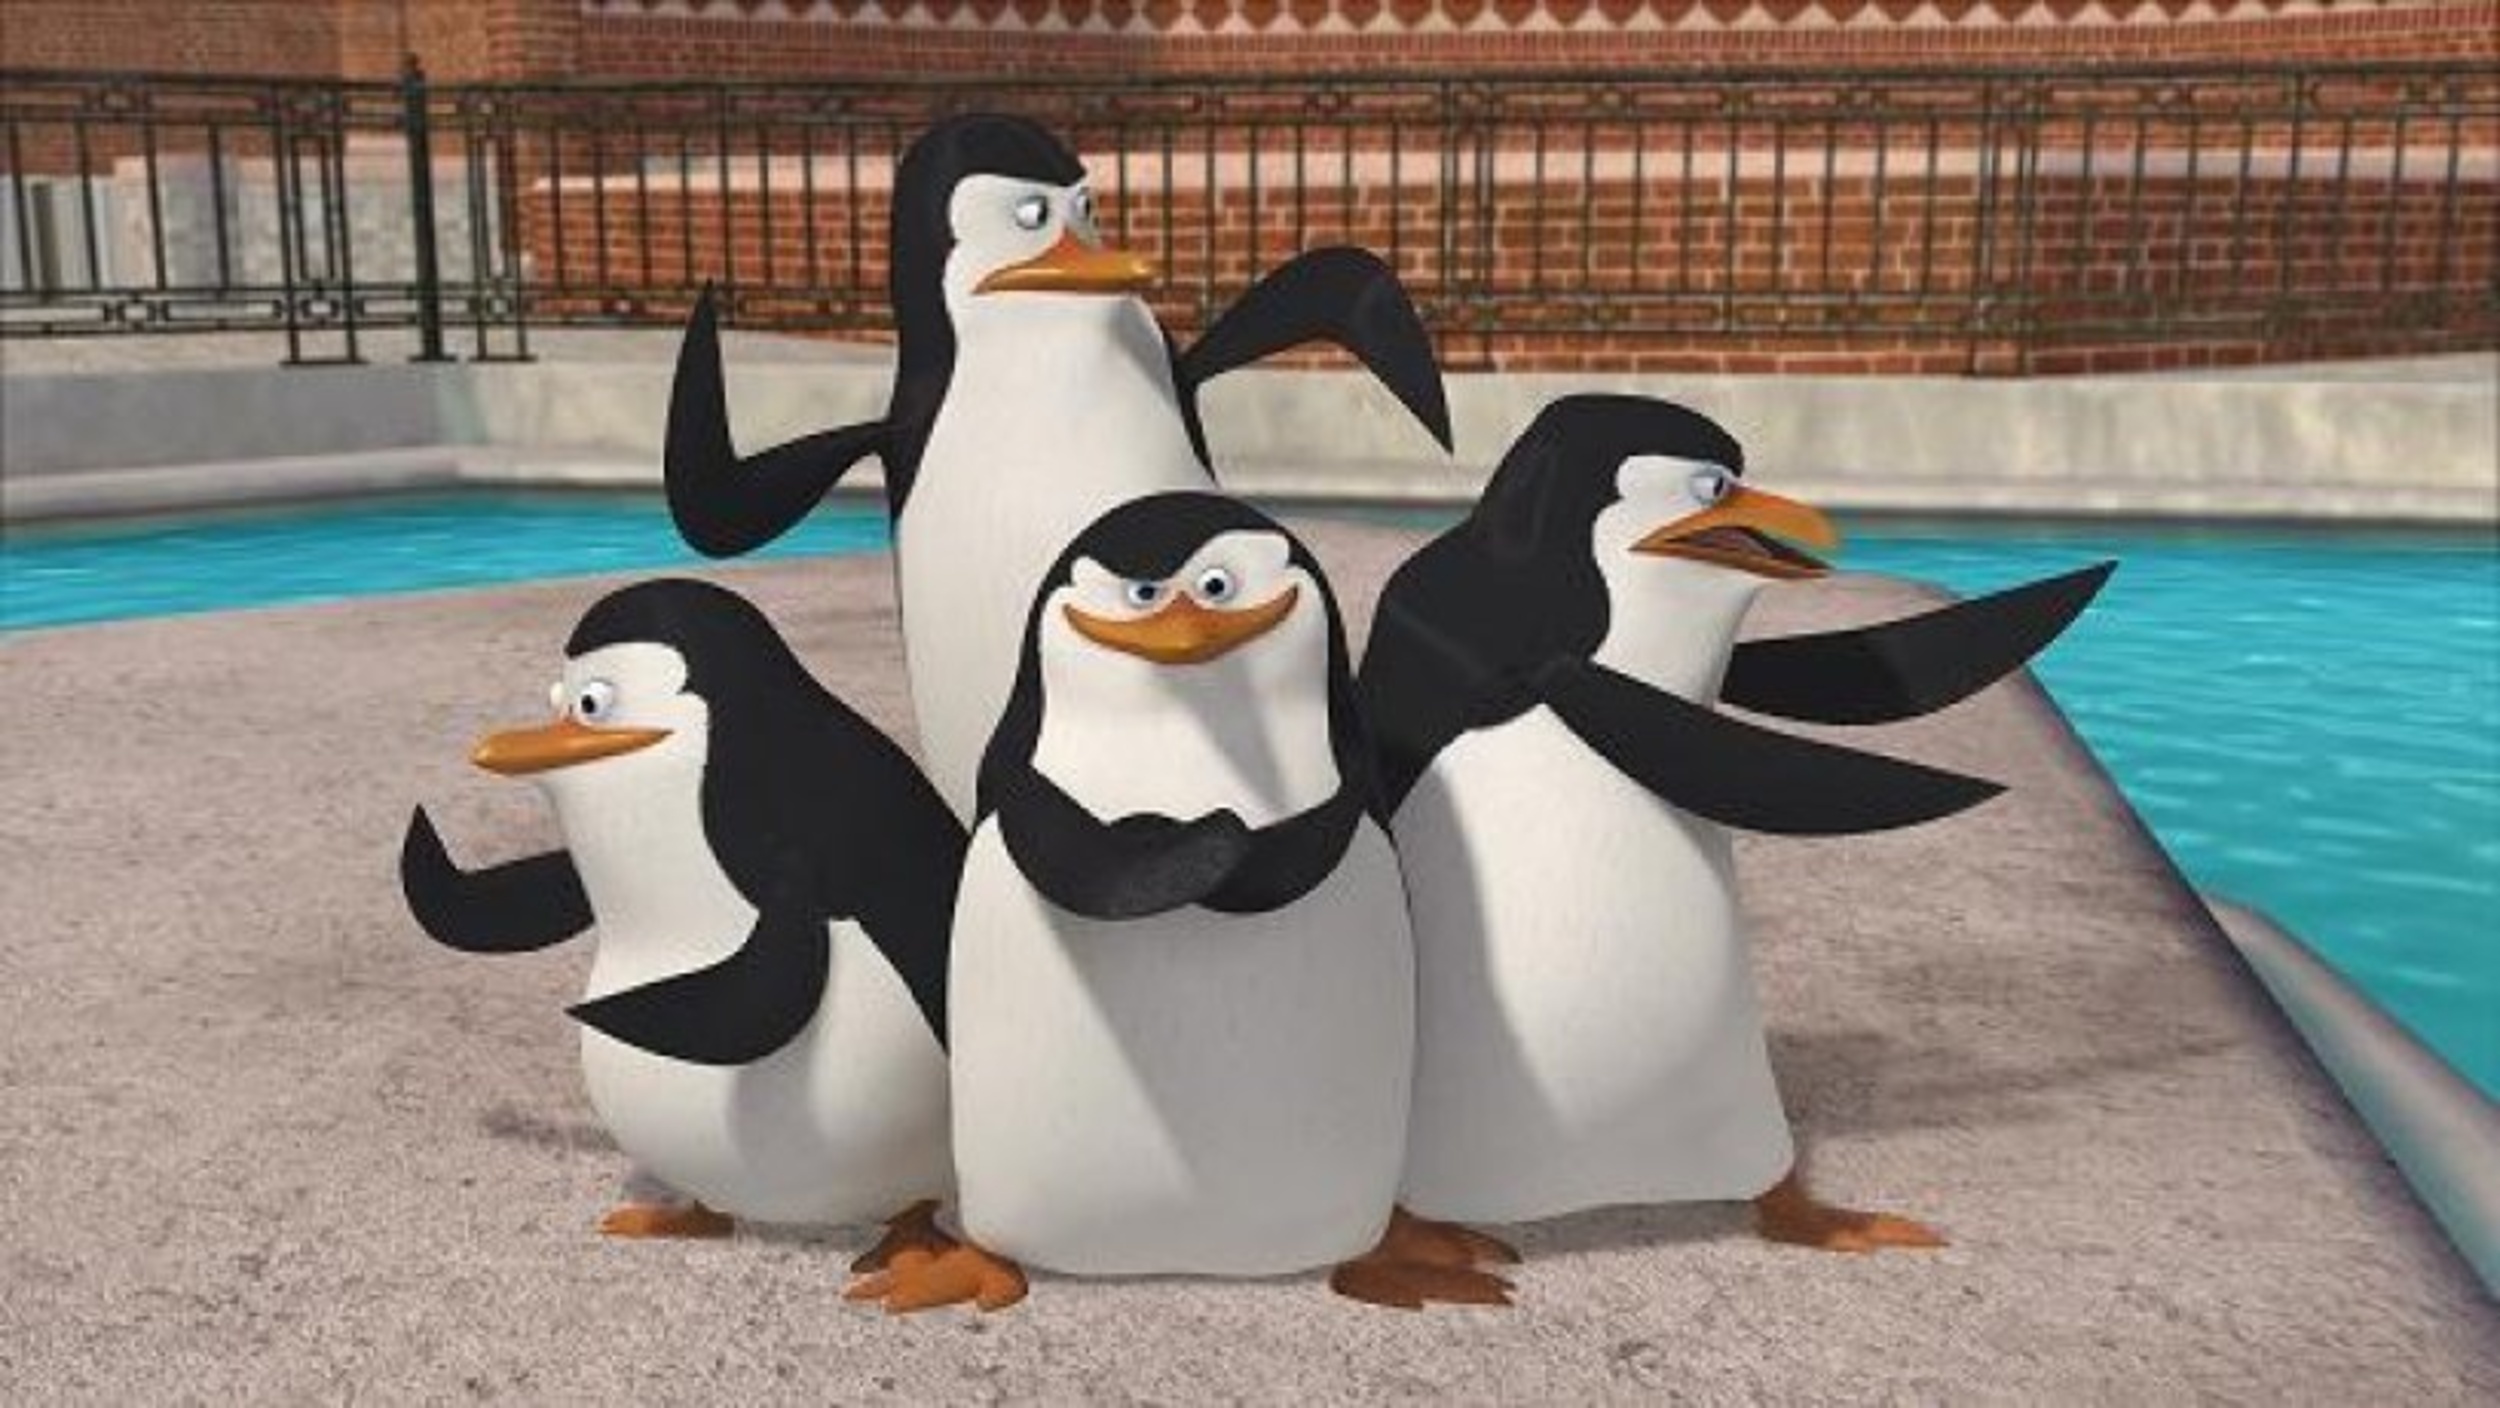 <p>The penguins in <em>Madagascar</em> weren’t even the stars, but by being adorable, silly penguins, they managed to gain momentum that has taken them from side characters in a movie franchise to being the stars of their own series.</p><p><a href='https://www.msn.com/en-us/community/channel/vid-cj9pqbr0vn9in2b6ddcd8sfgpfq6x6utp44fssrv6mc2gtybw0us'>Follow us on MSN to see more of our exclusive entertainment content.</a></p>